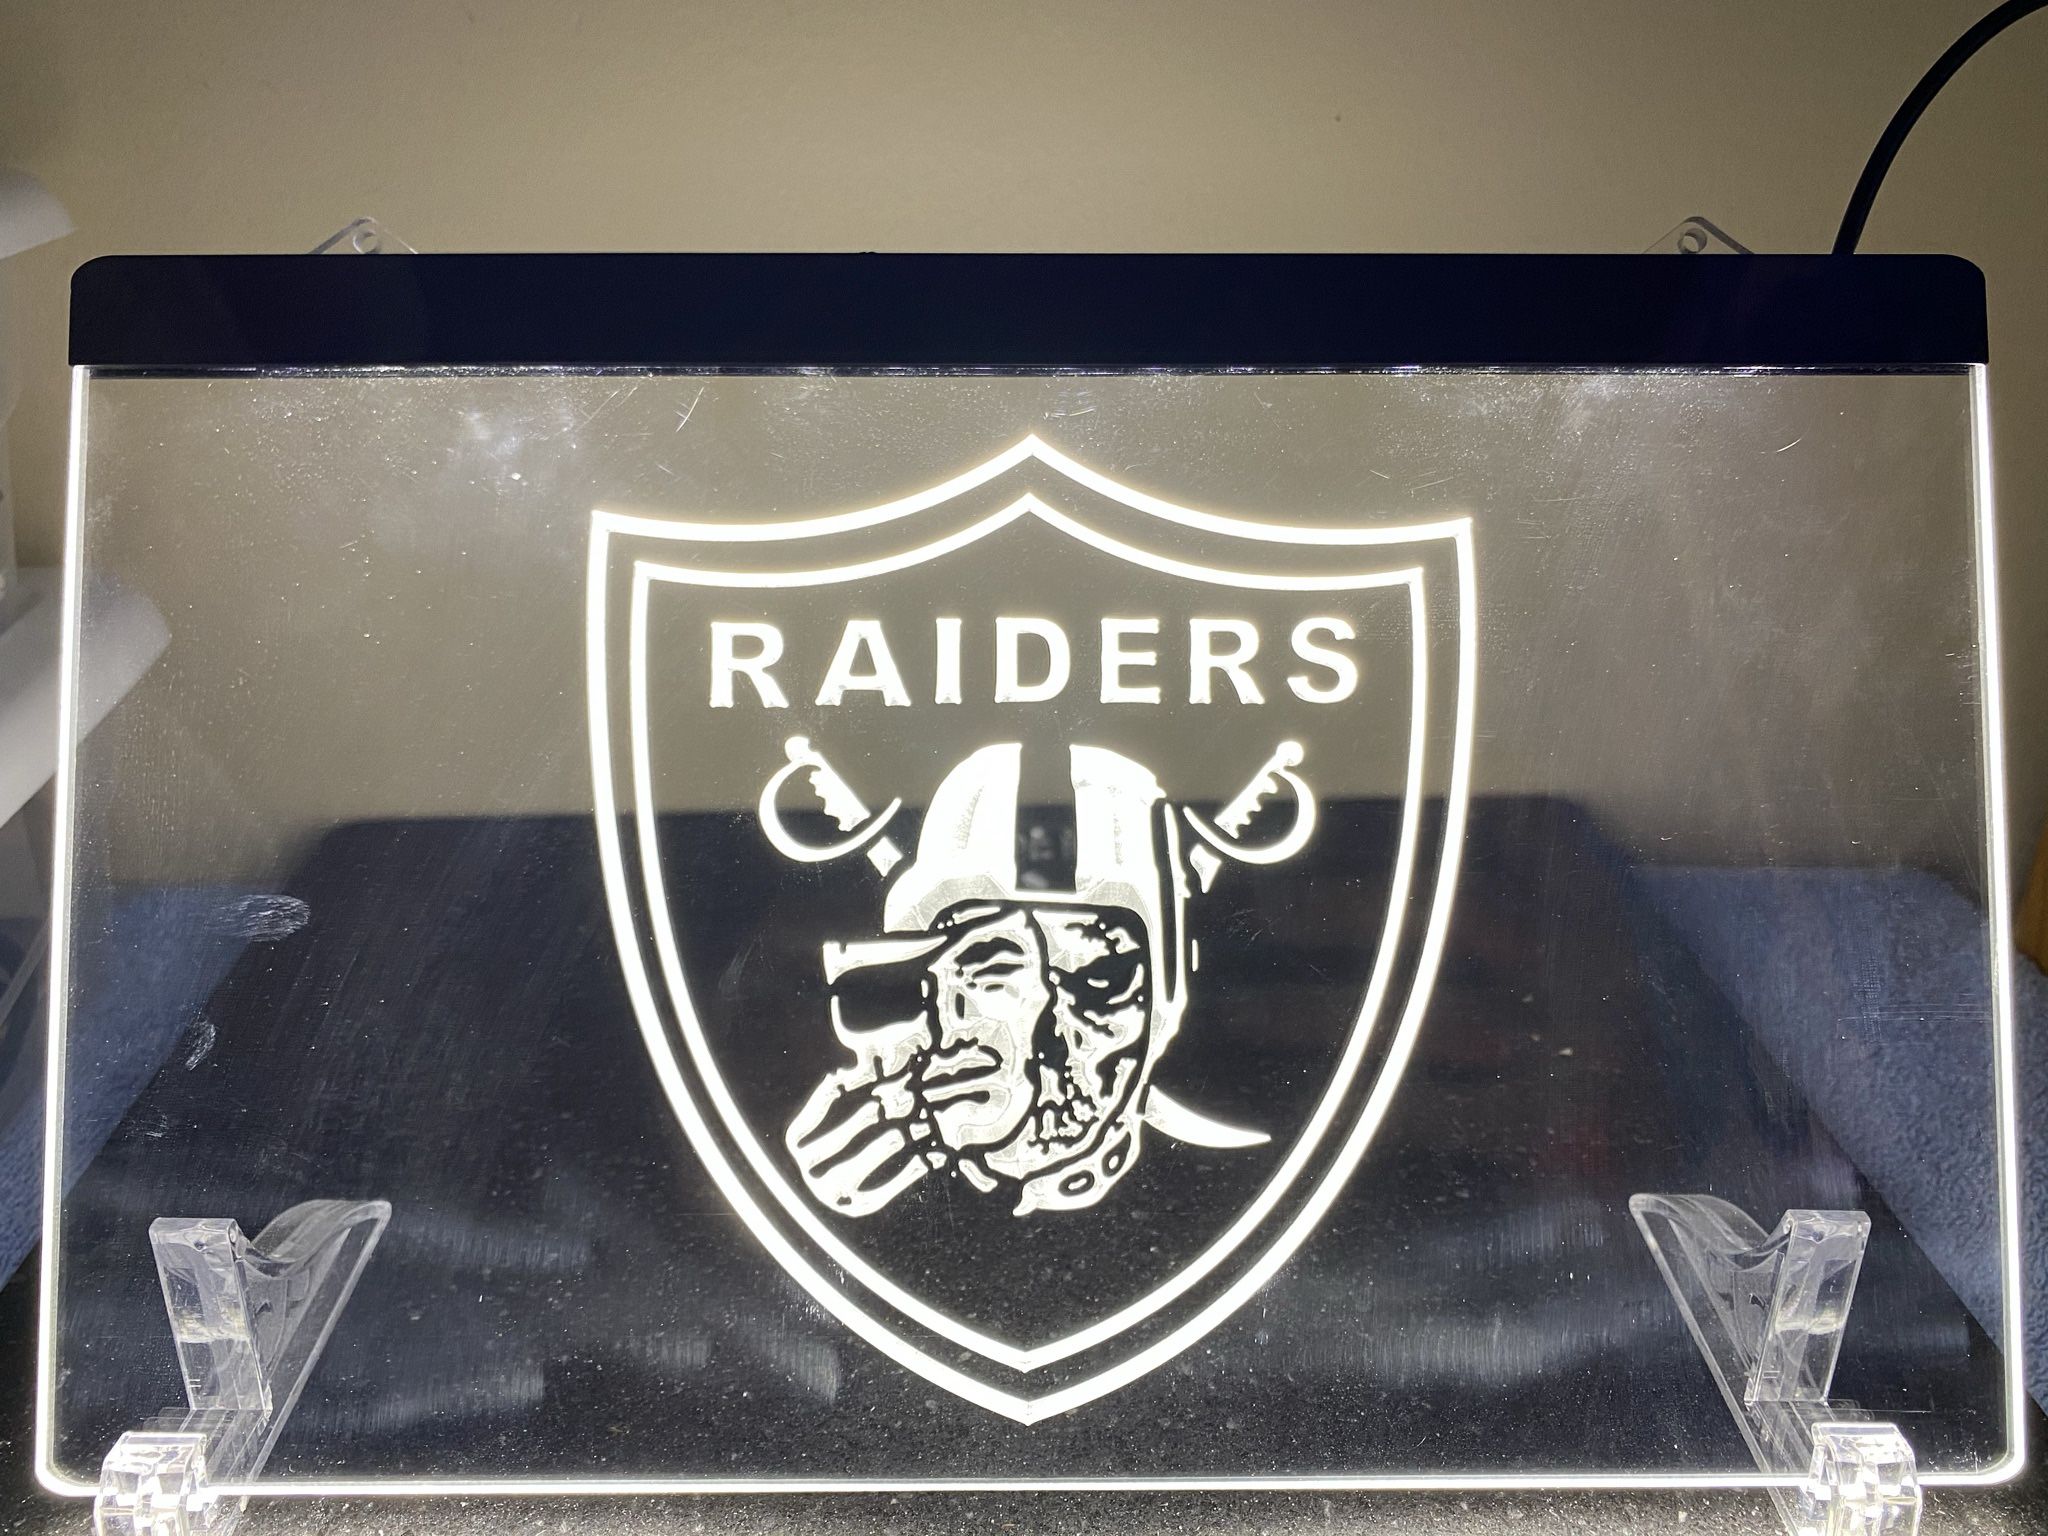 Las Vegas Raiders LED Sign (8”x12”) for Sale in Frankfort, IL - OfferUp